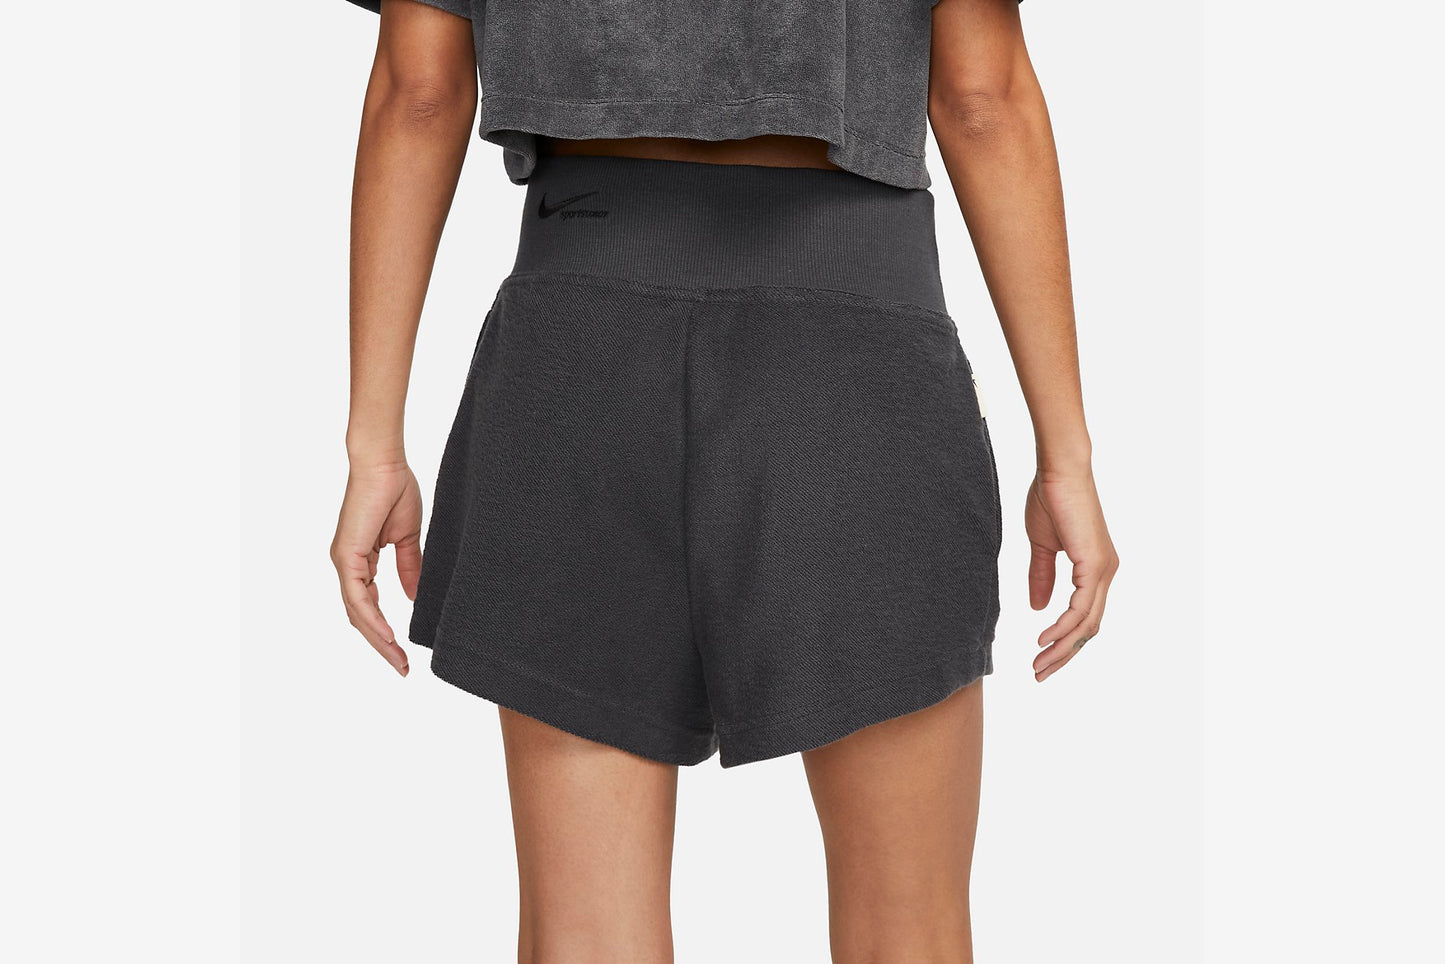 Nike "High-Waisted Reverse" French Terry Short W - Anthracite/Anthracite/Black